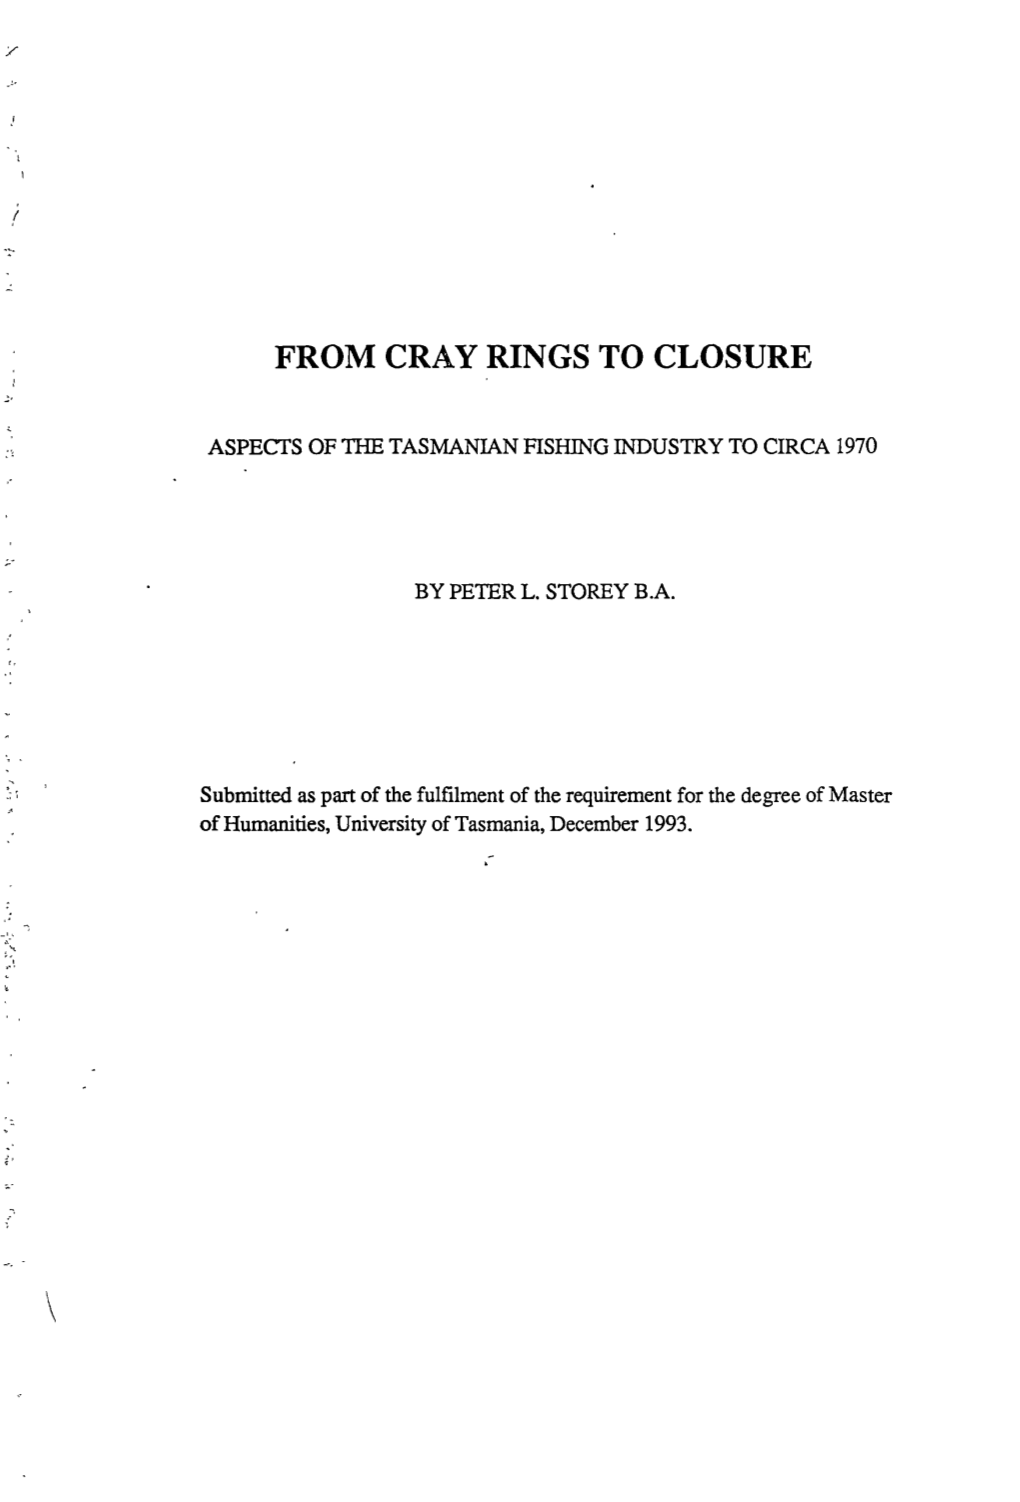 From Cray Rings to Closure : Aspects of the Tasmanian Fishing Industry To